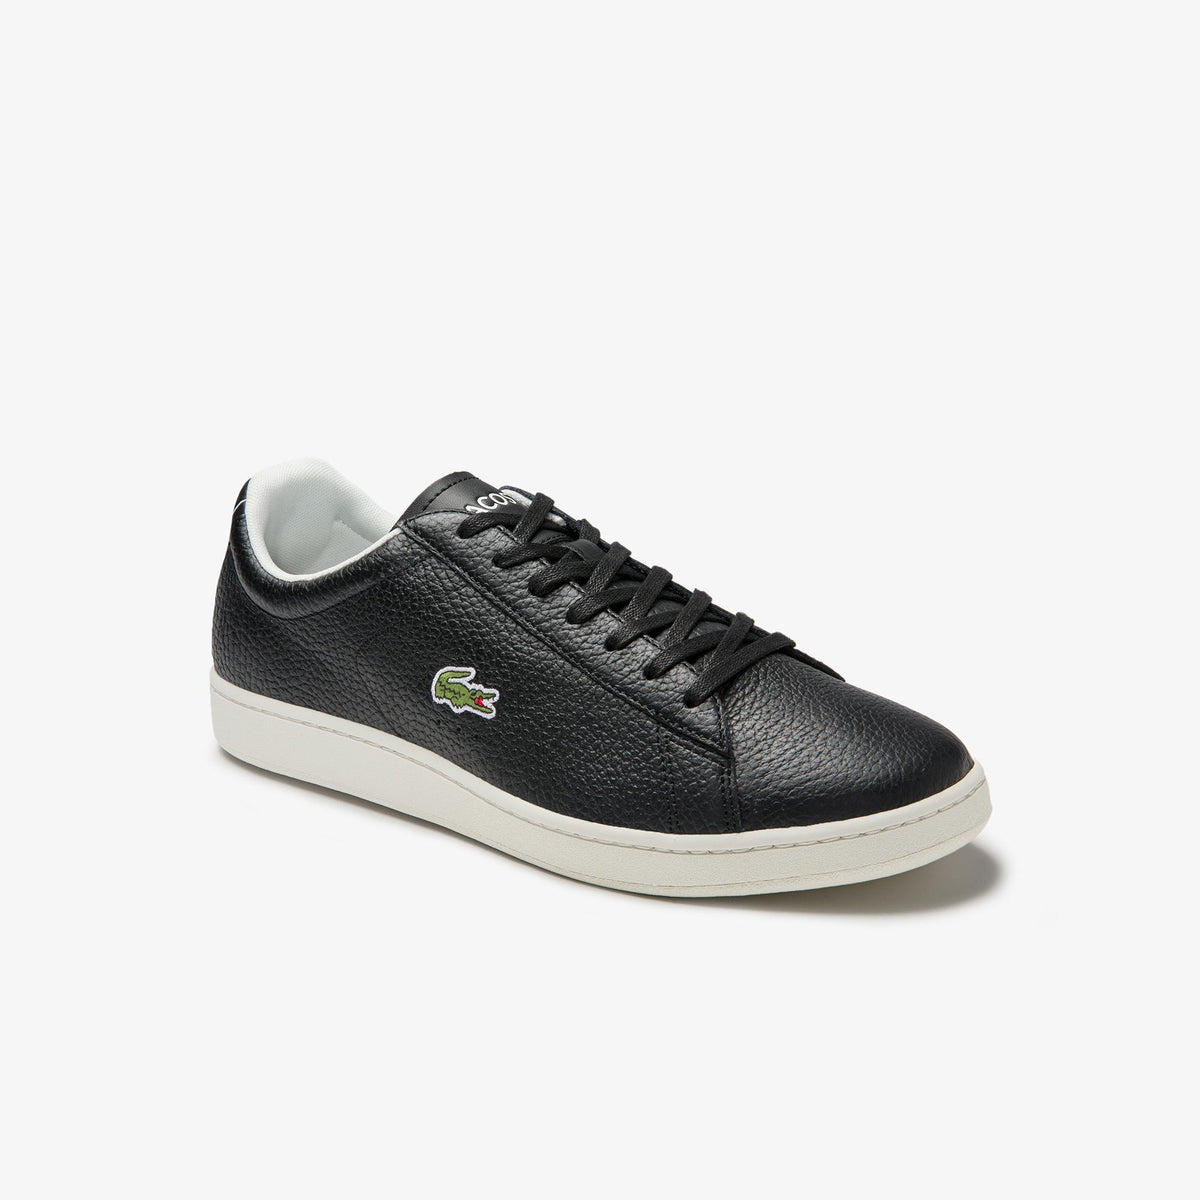 Carnaby Evo Tumbled Leather Sneakers Black & White